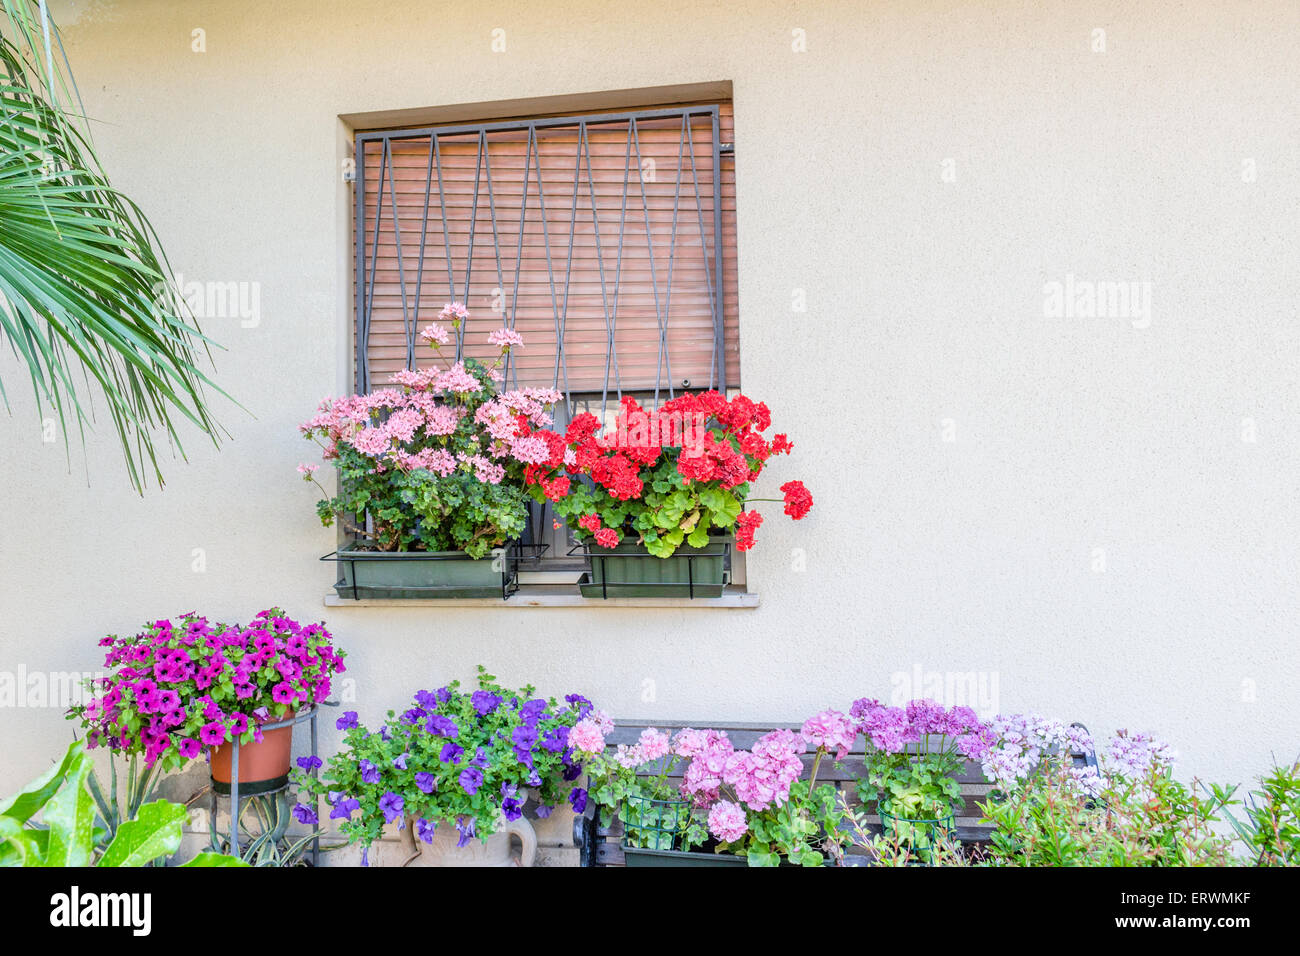 window with iron grating and flower pots: red and pink geranium, fuchsia and purple petunias Stock Photo